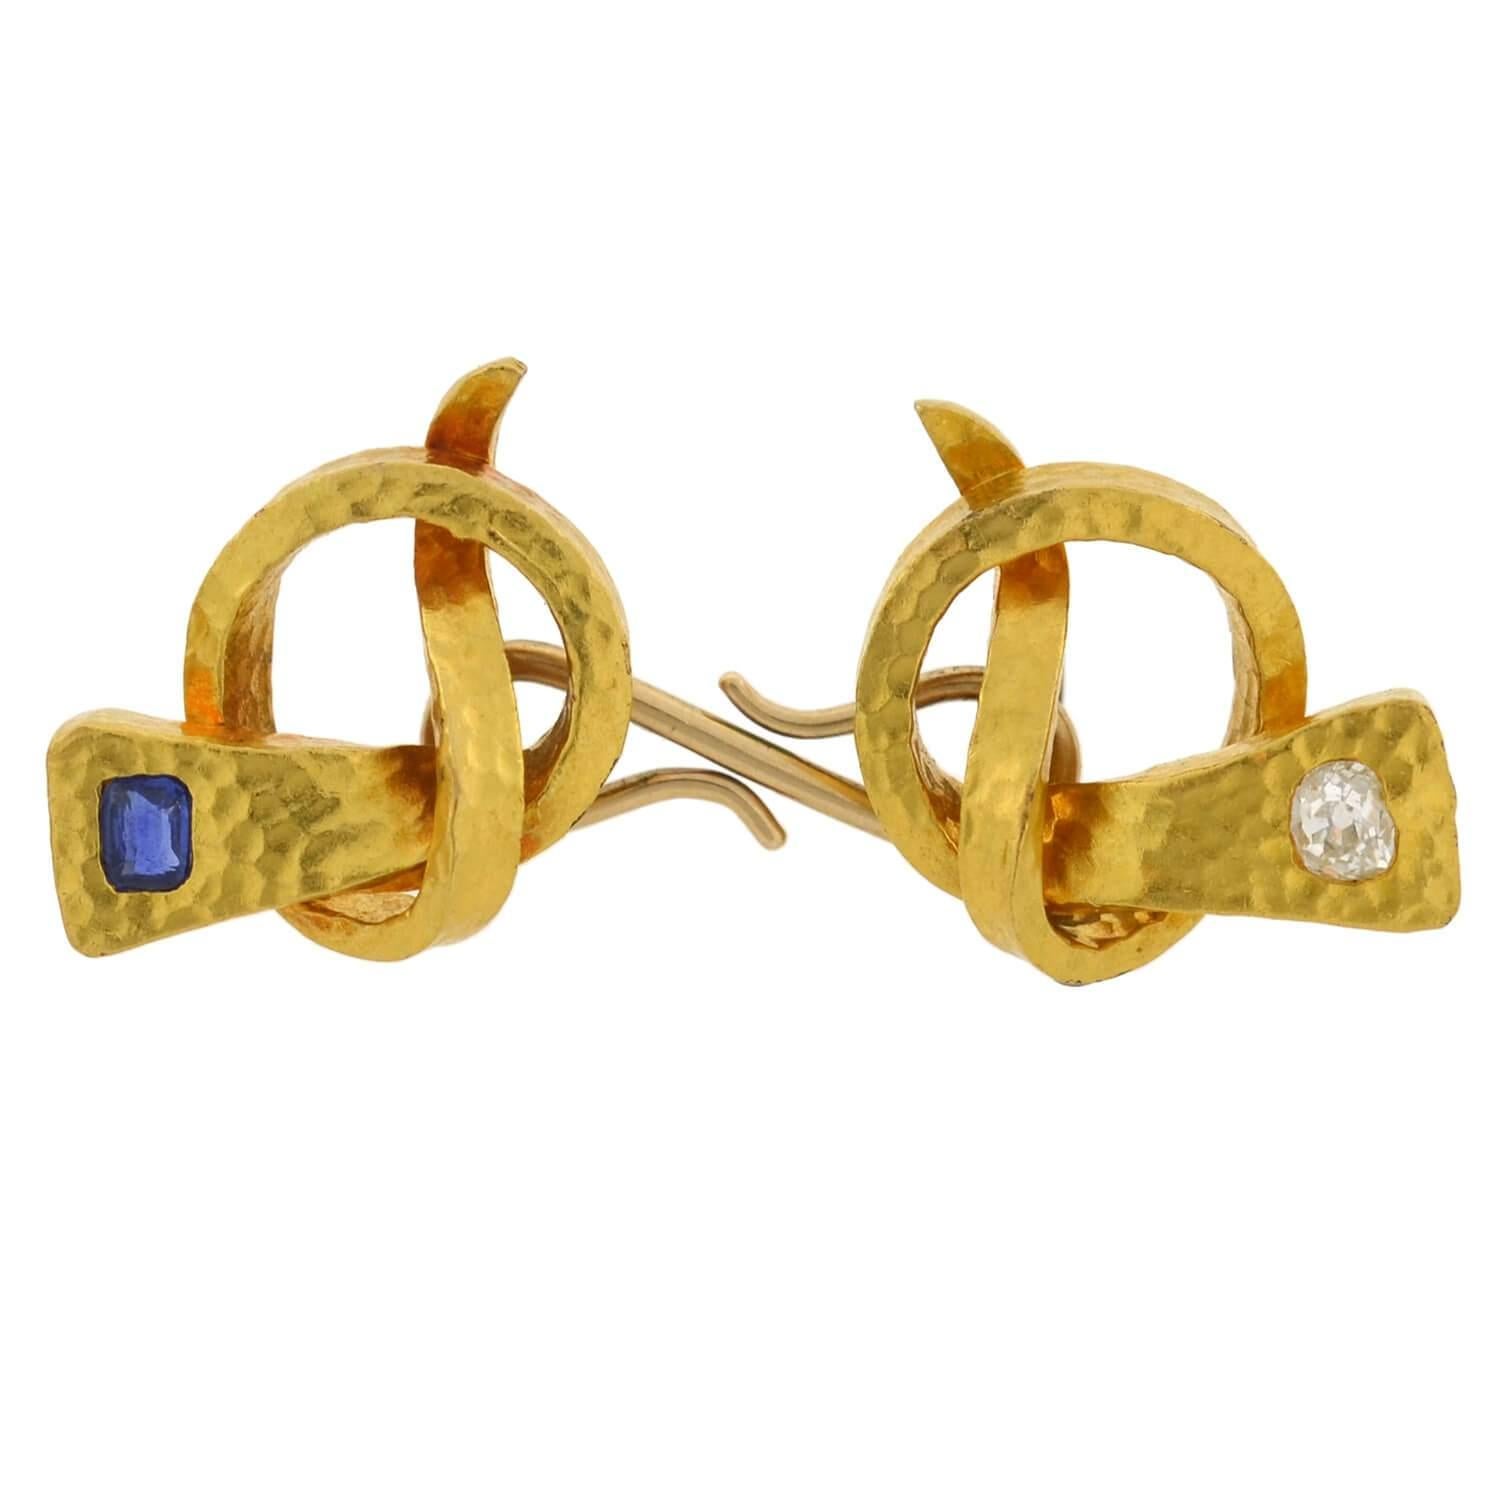 A beautiful and unusual pair of gemstone cufflinks from the Arts and Crafts (ca1910) era! Crafted in vibrant 14kt yellow gold, these double-sided cufflinks are bursting with detail. Each is comprised of two horseshoe nails which are uniquely knotted